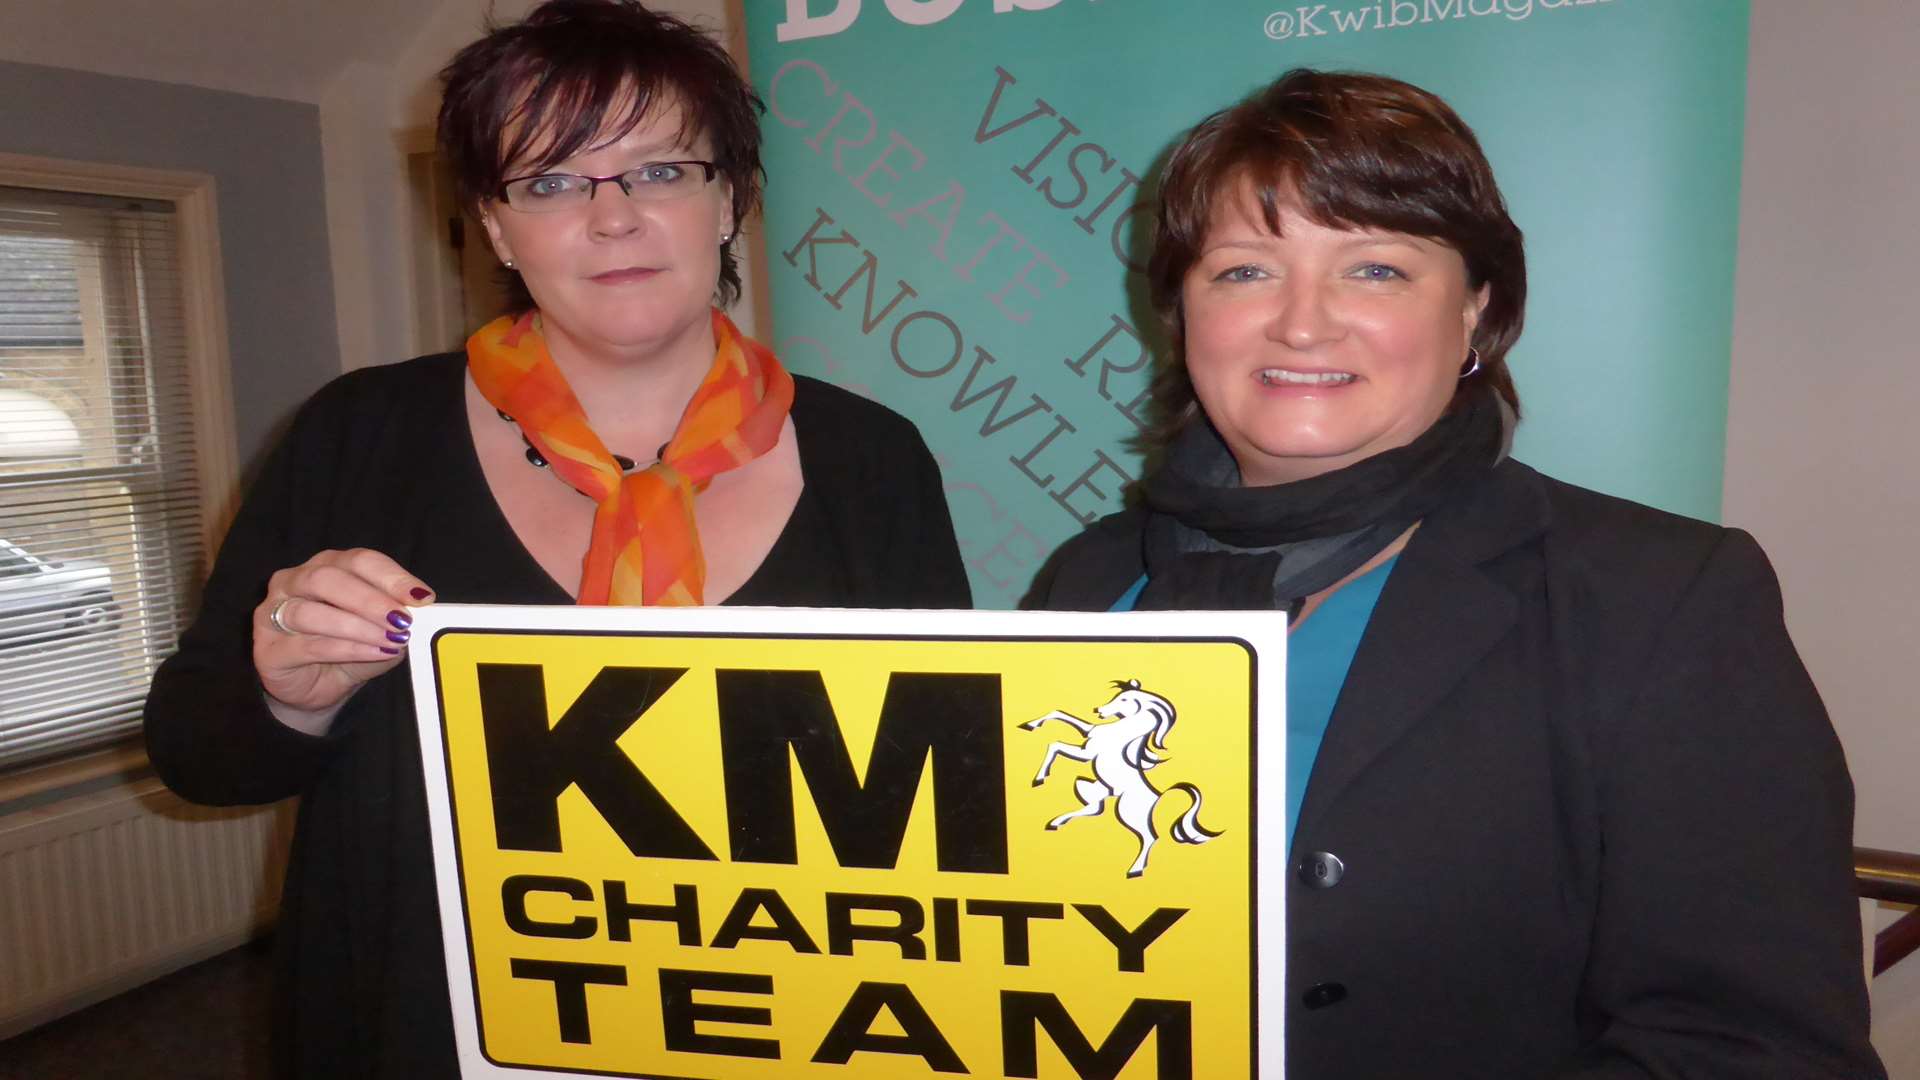 Hilary Steel and Sue Smith of Kent Women In Business which has been made Corporate Ambassador of the KM Charity Team for its support of the KM Colour Run 2016.